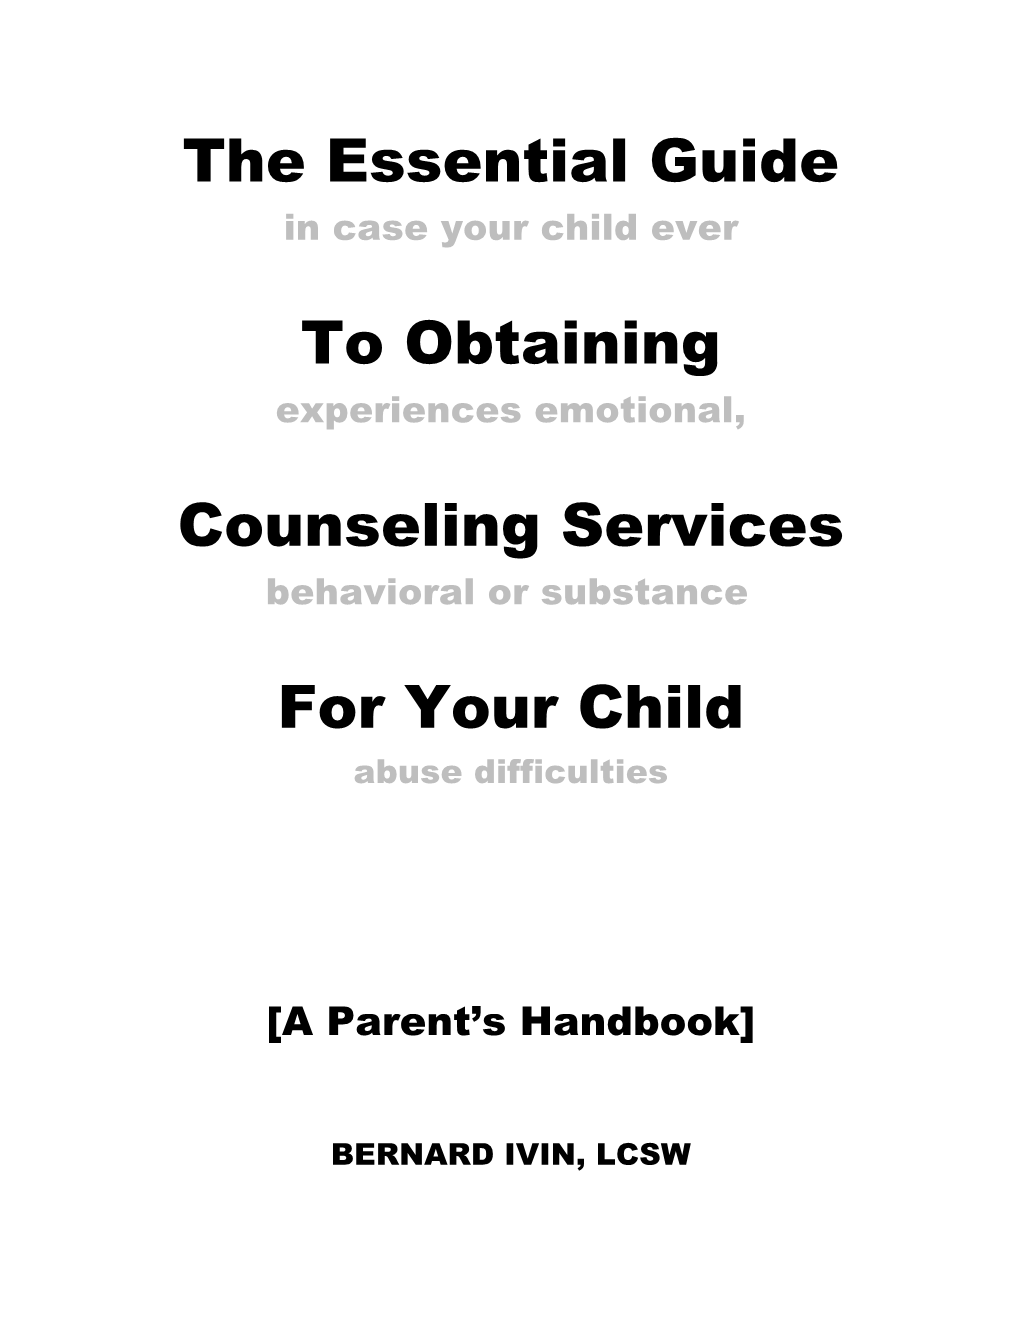 The Essential Guide to Obtaining Counseling Services for Your Child